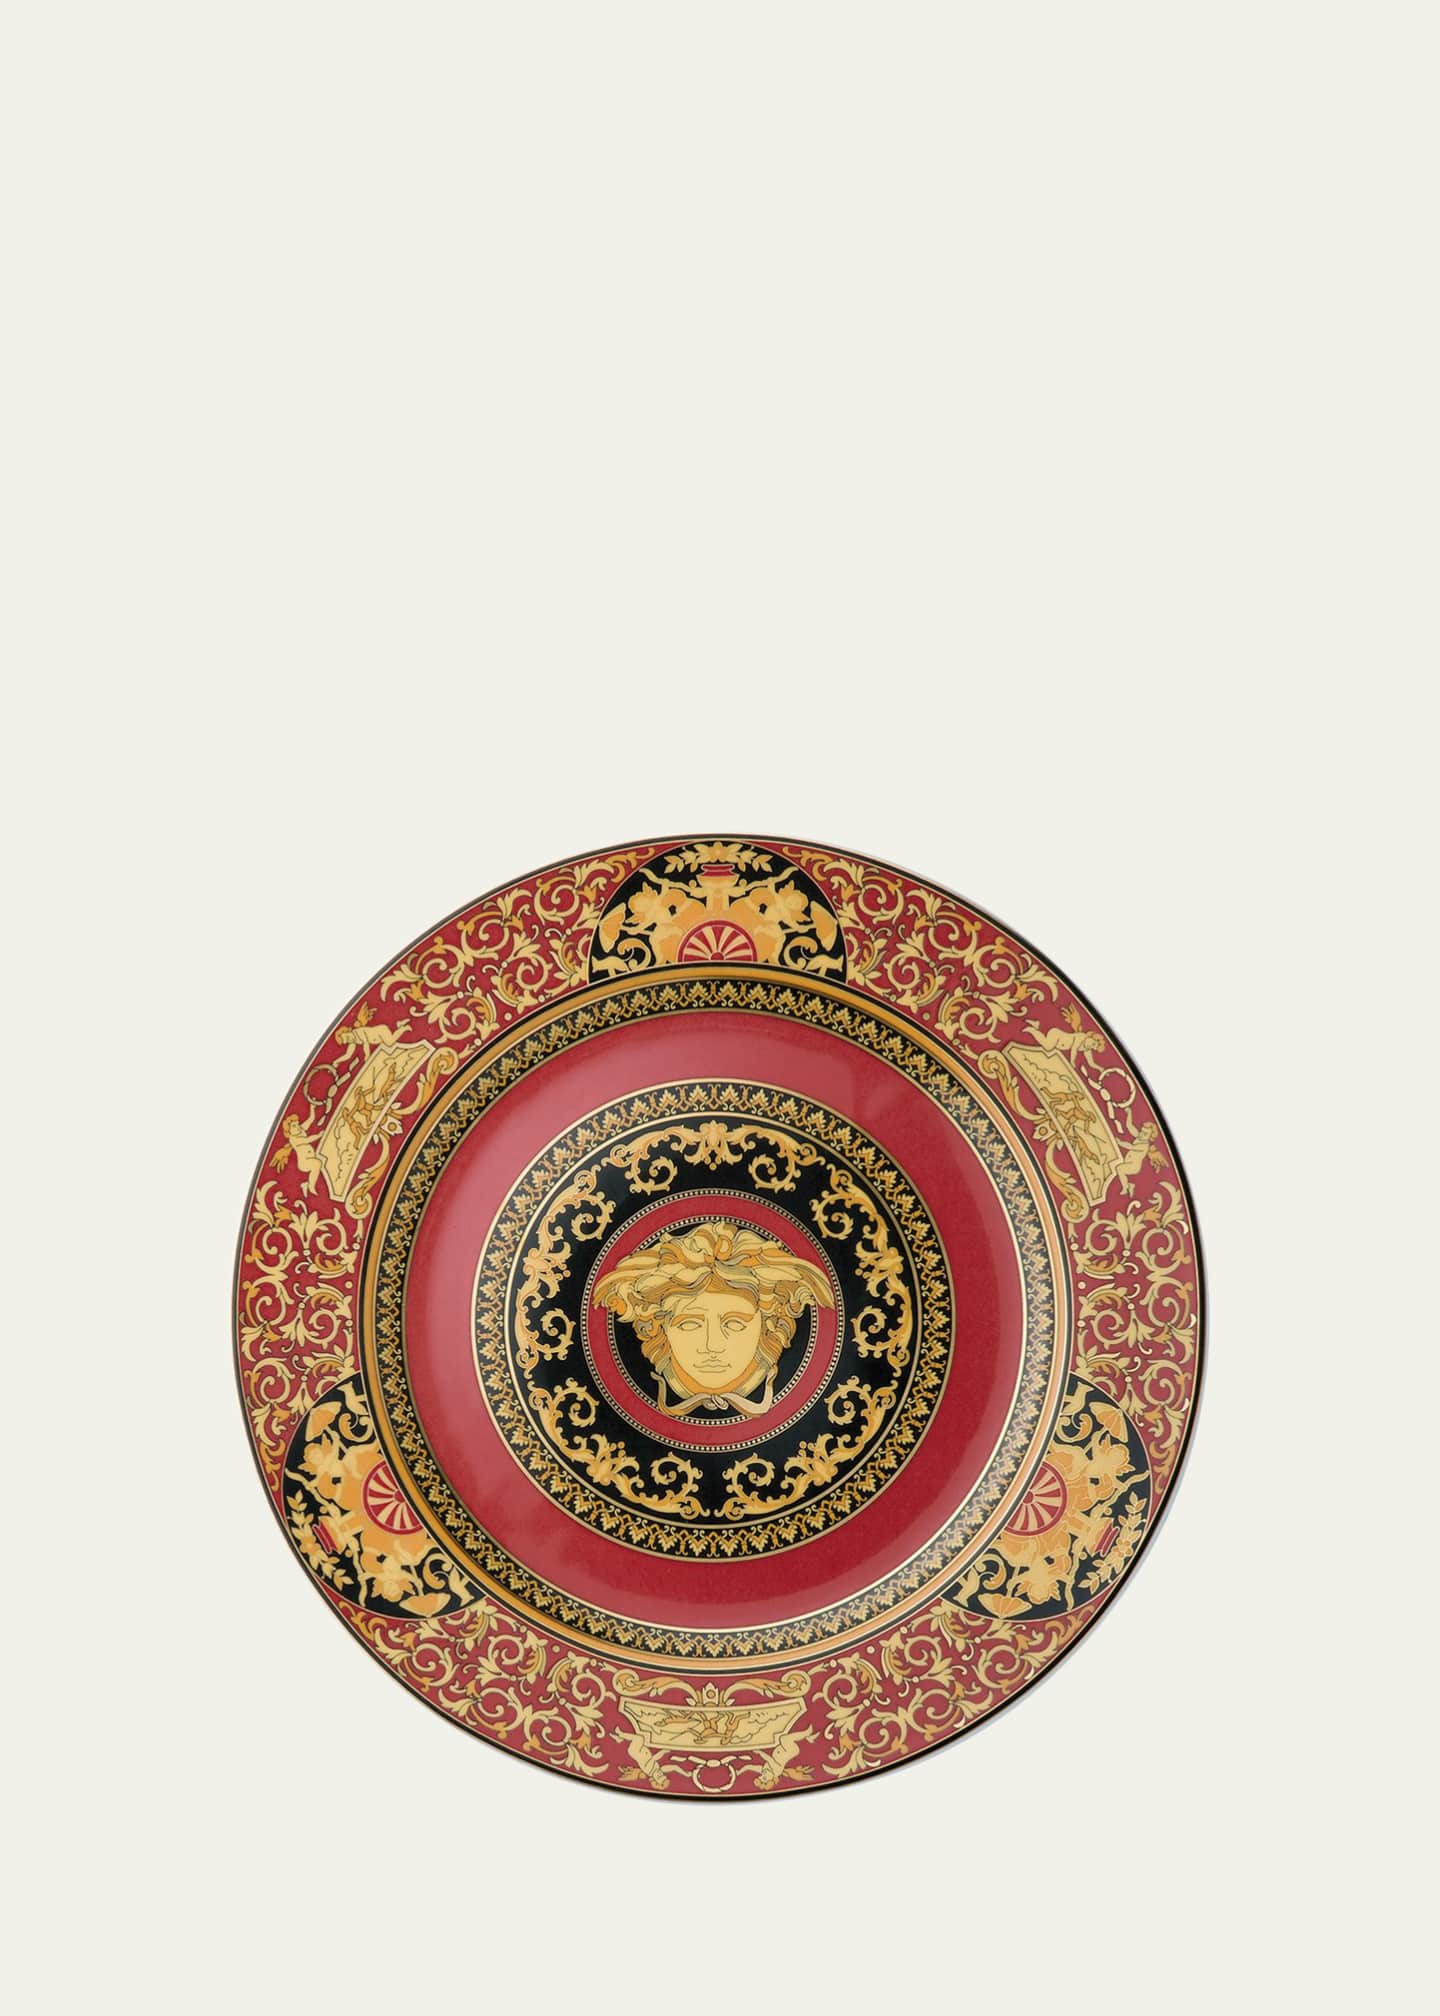 Versace Medusa Charger Plate Image 1 of 2